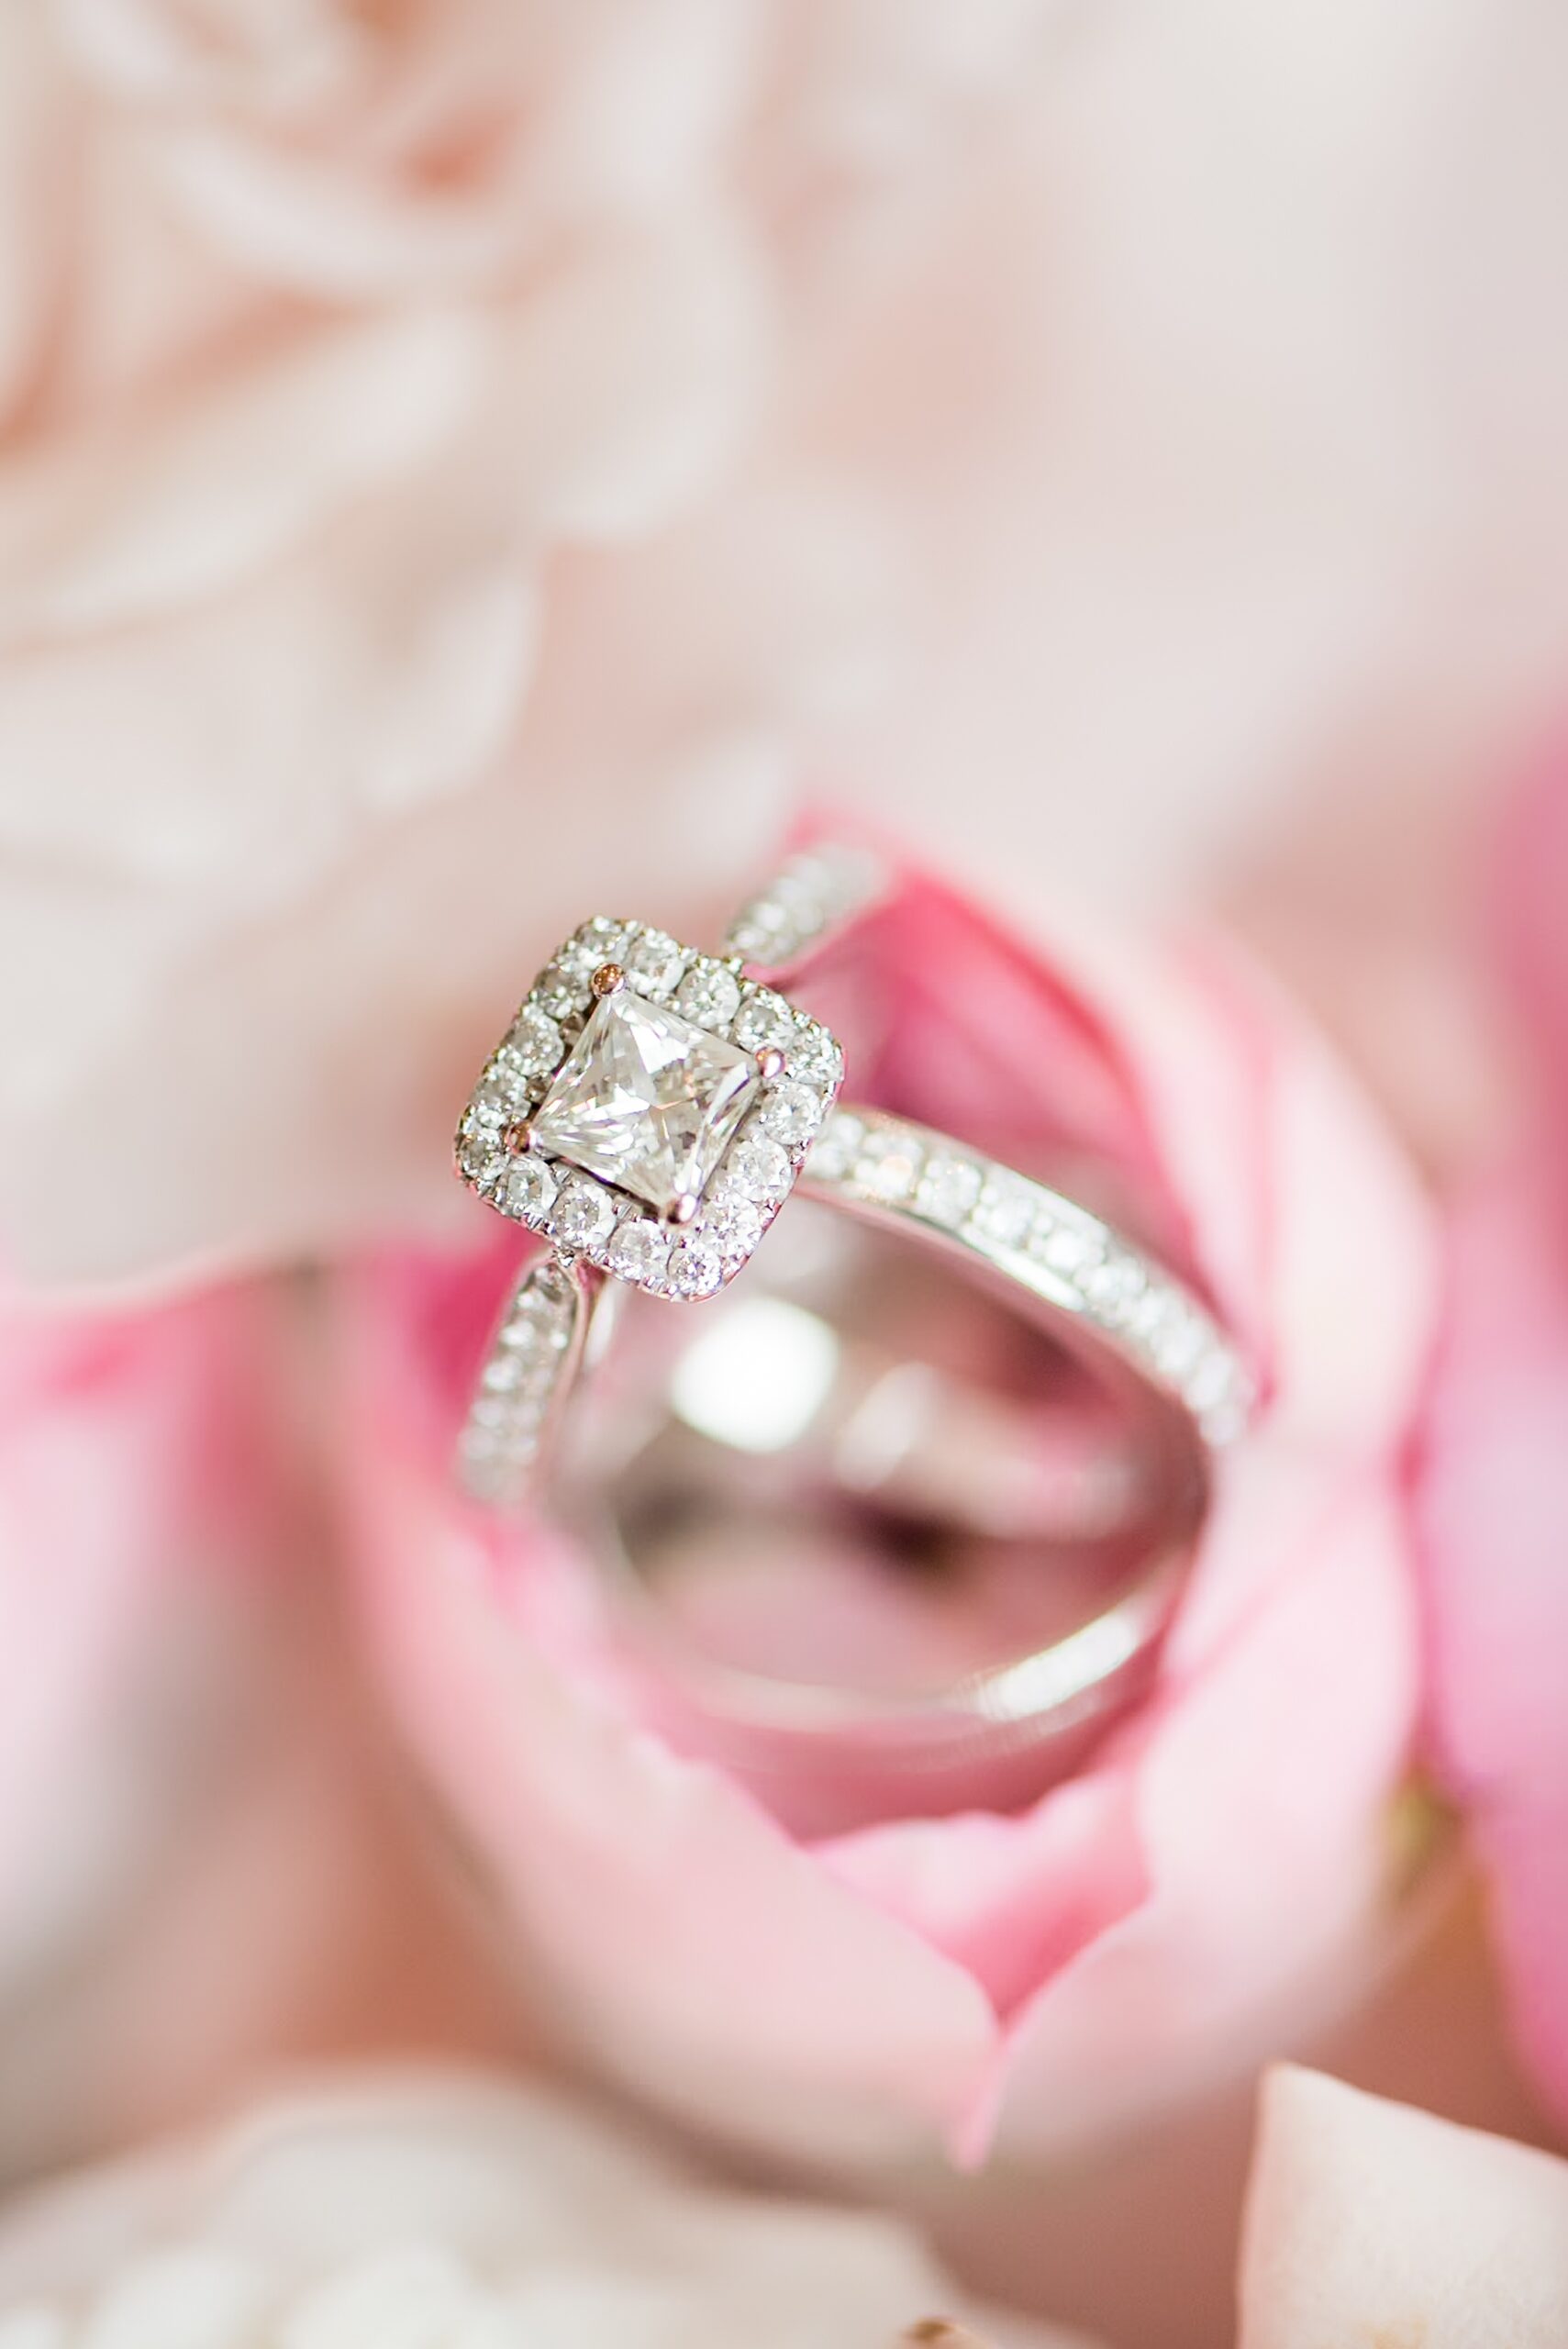 Details of an engagement ring and wedding band in a pink rose at one of the Baltimore Country Club Weddings